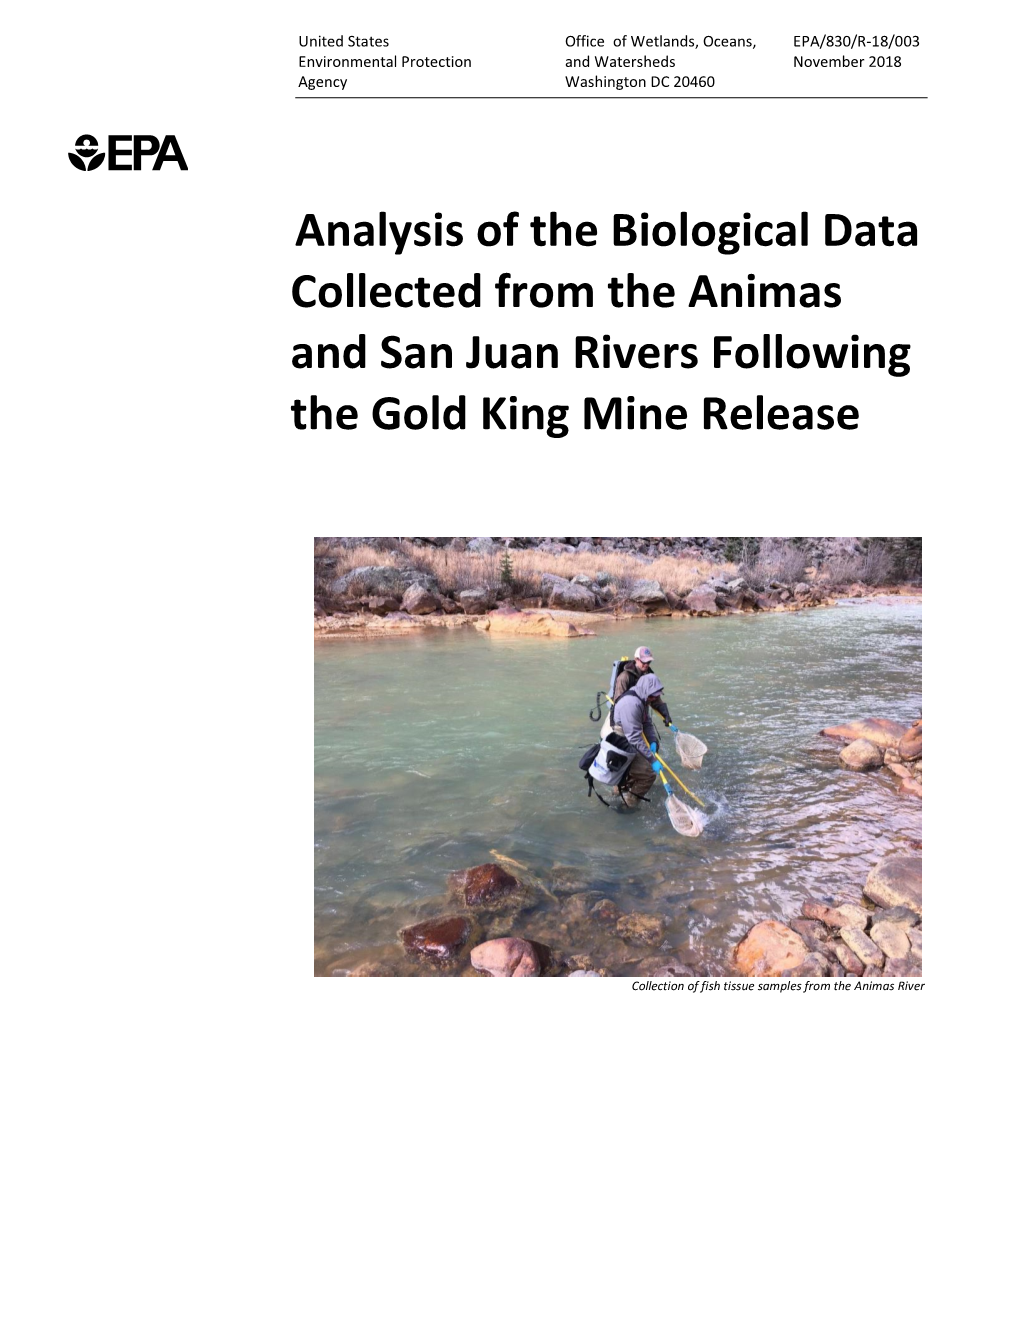 Analysis of the Biological Data Collected from the Animas and San Juan Rivers Following the Gold King Mine Release